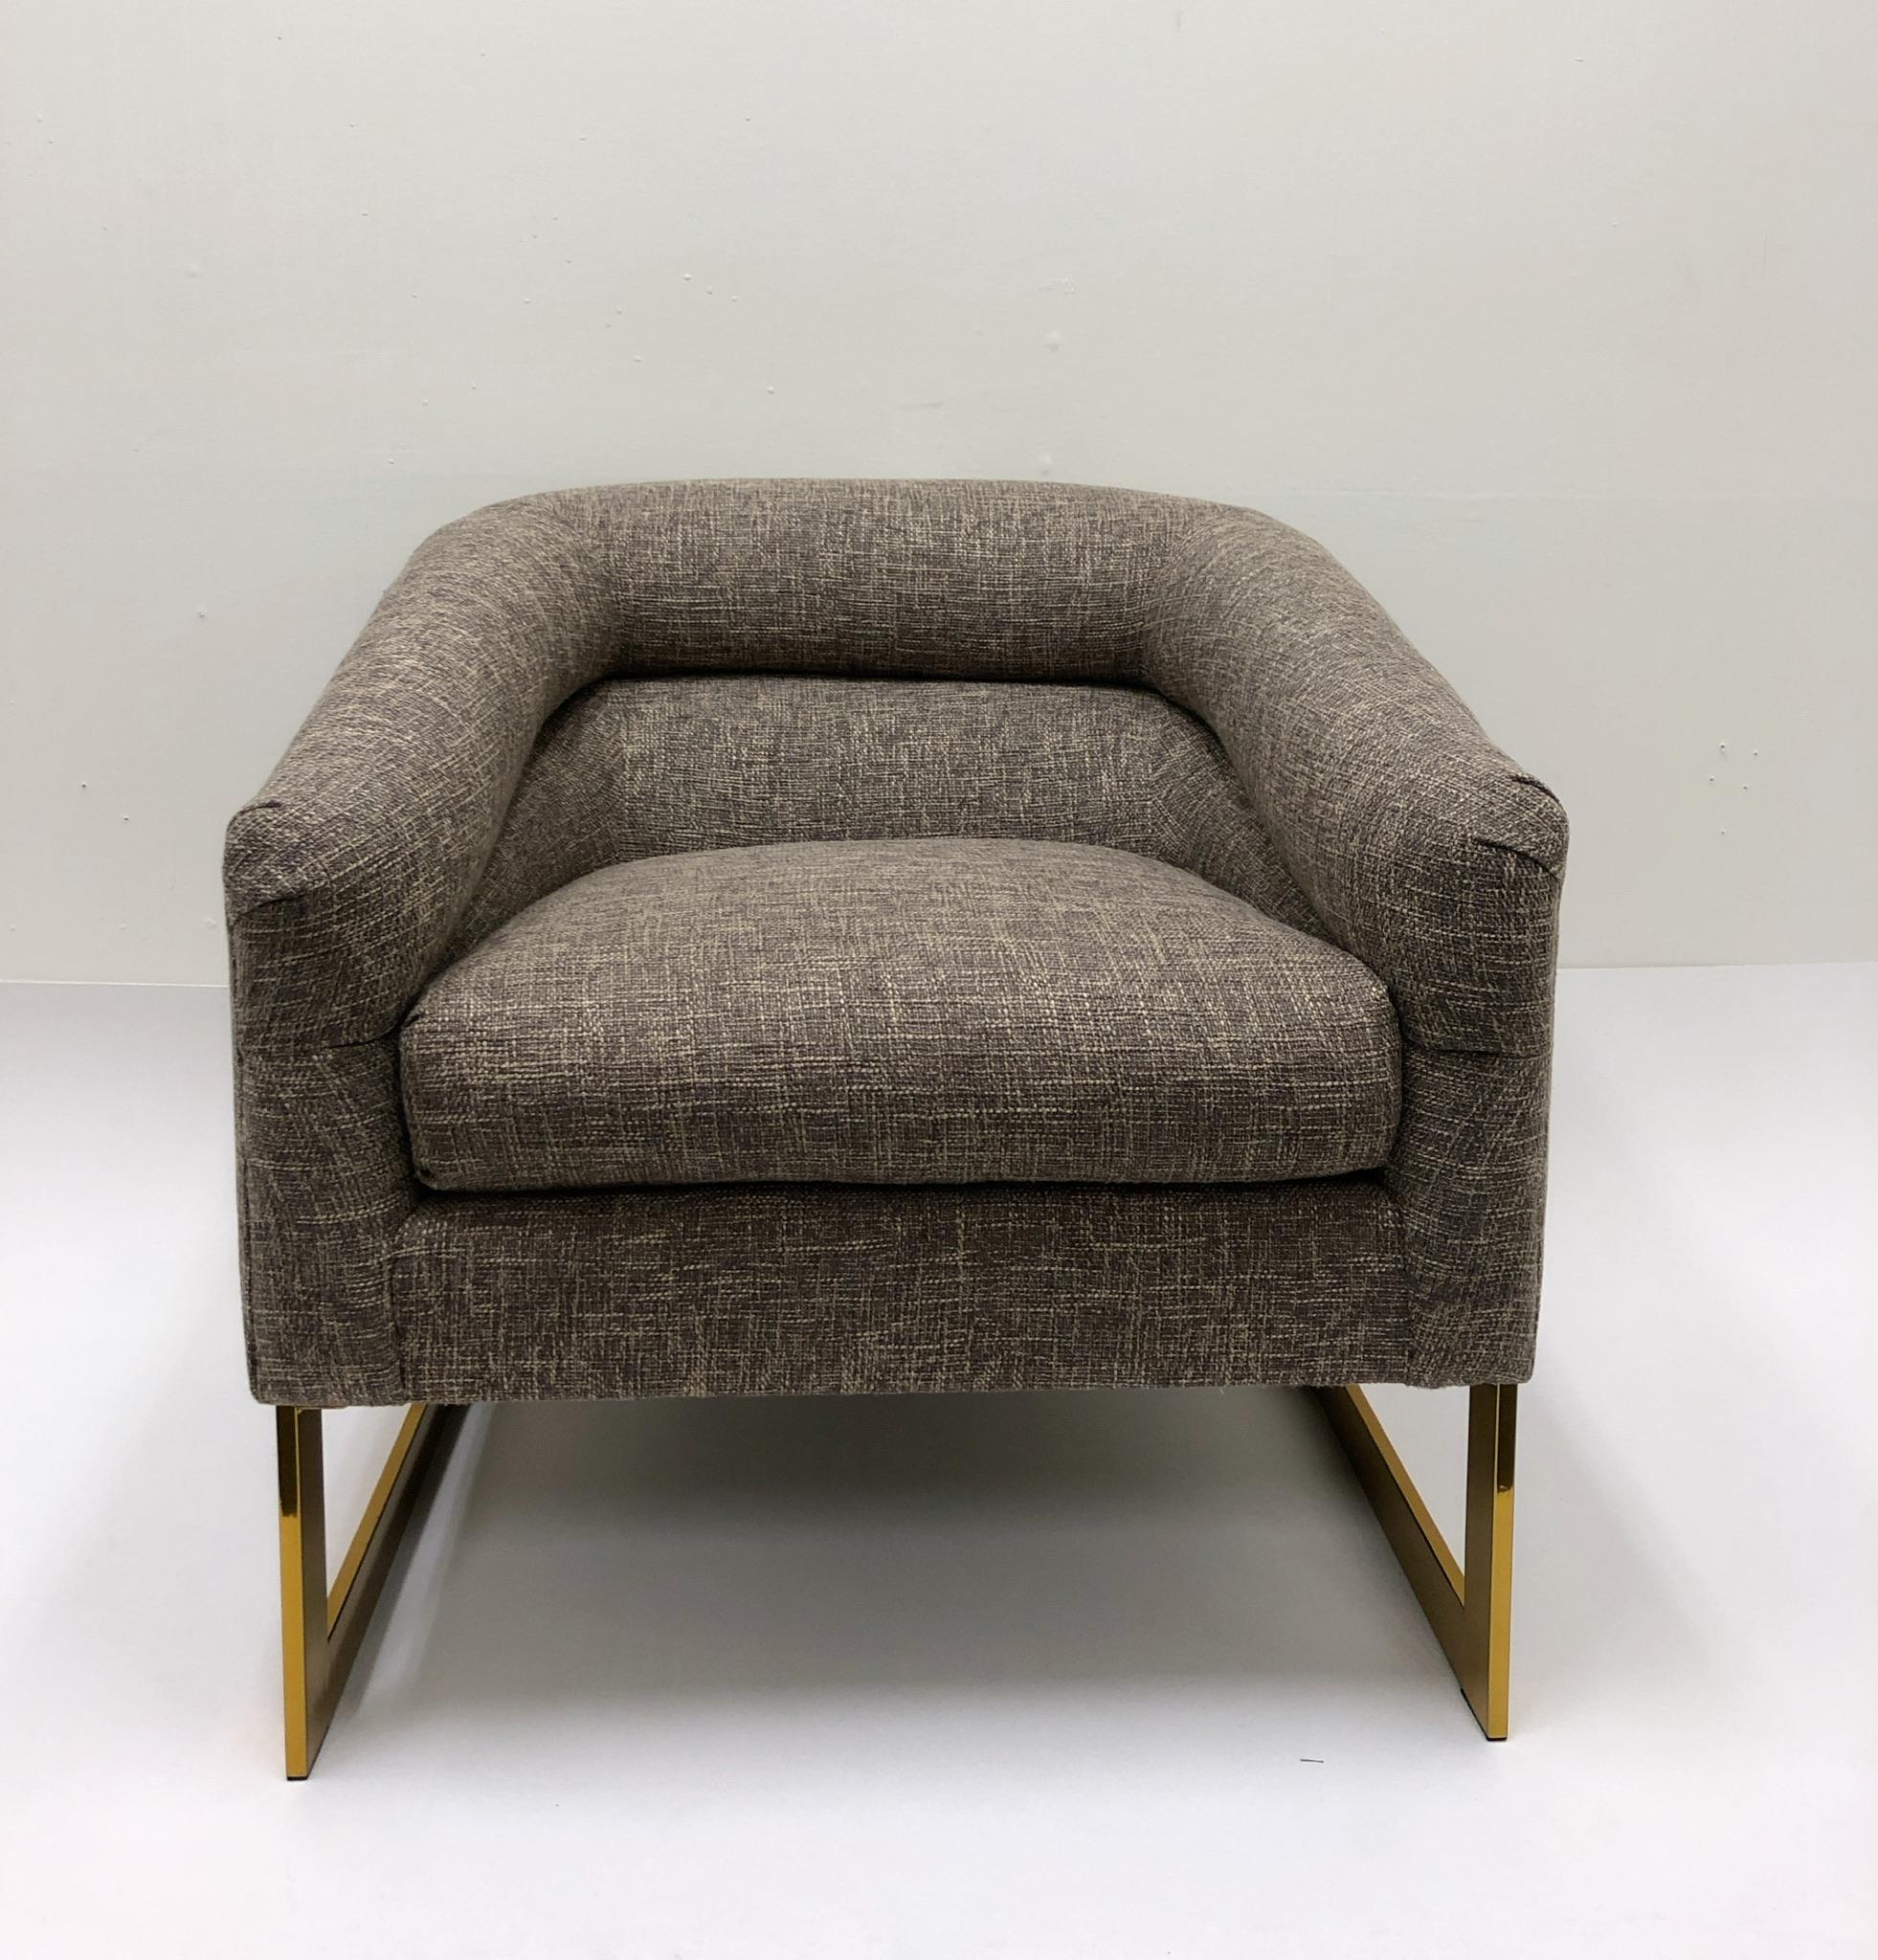 American Pair of Brass and Fabric Lounge Chairs by Milo Baughman